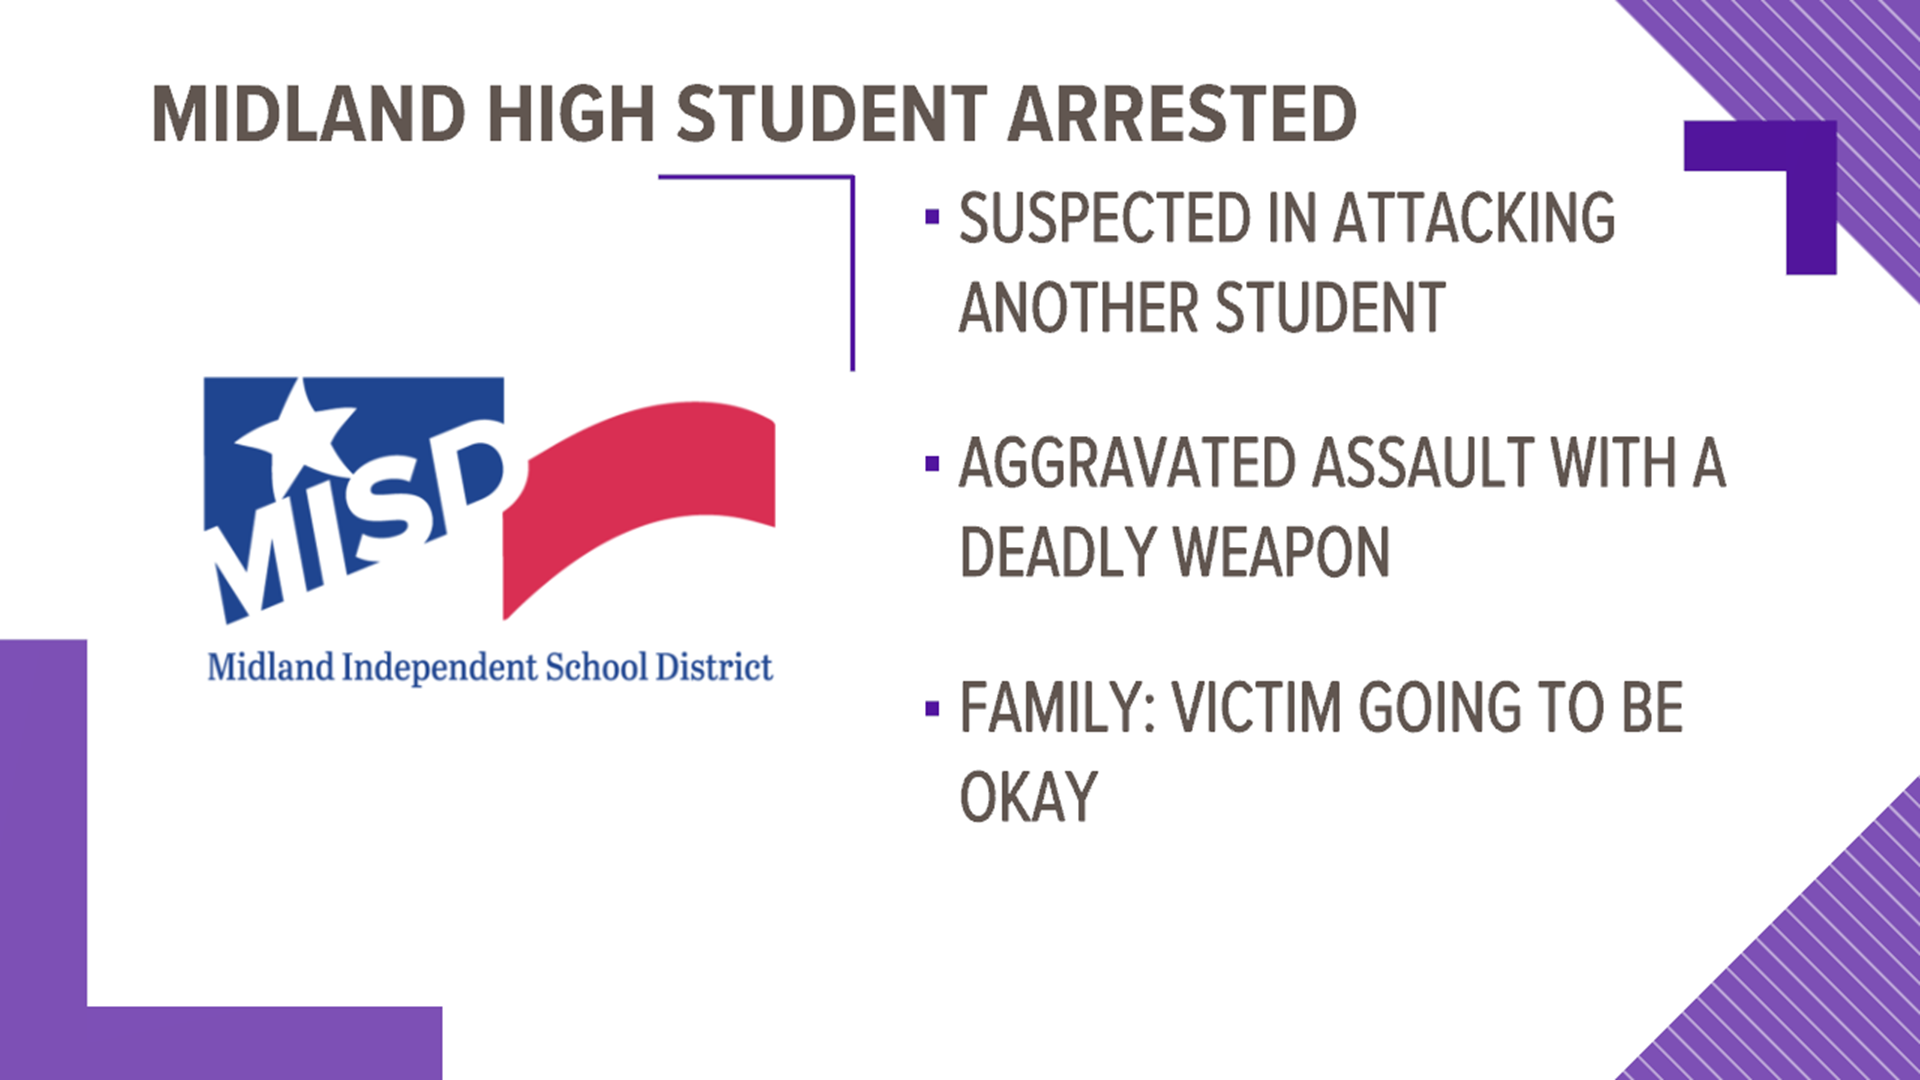 MISD says the student allegedly used brass knuckles to assault another student.